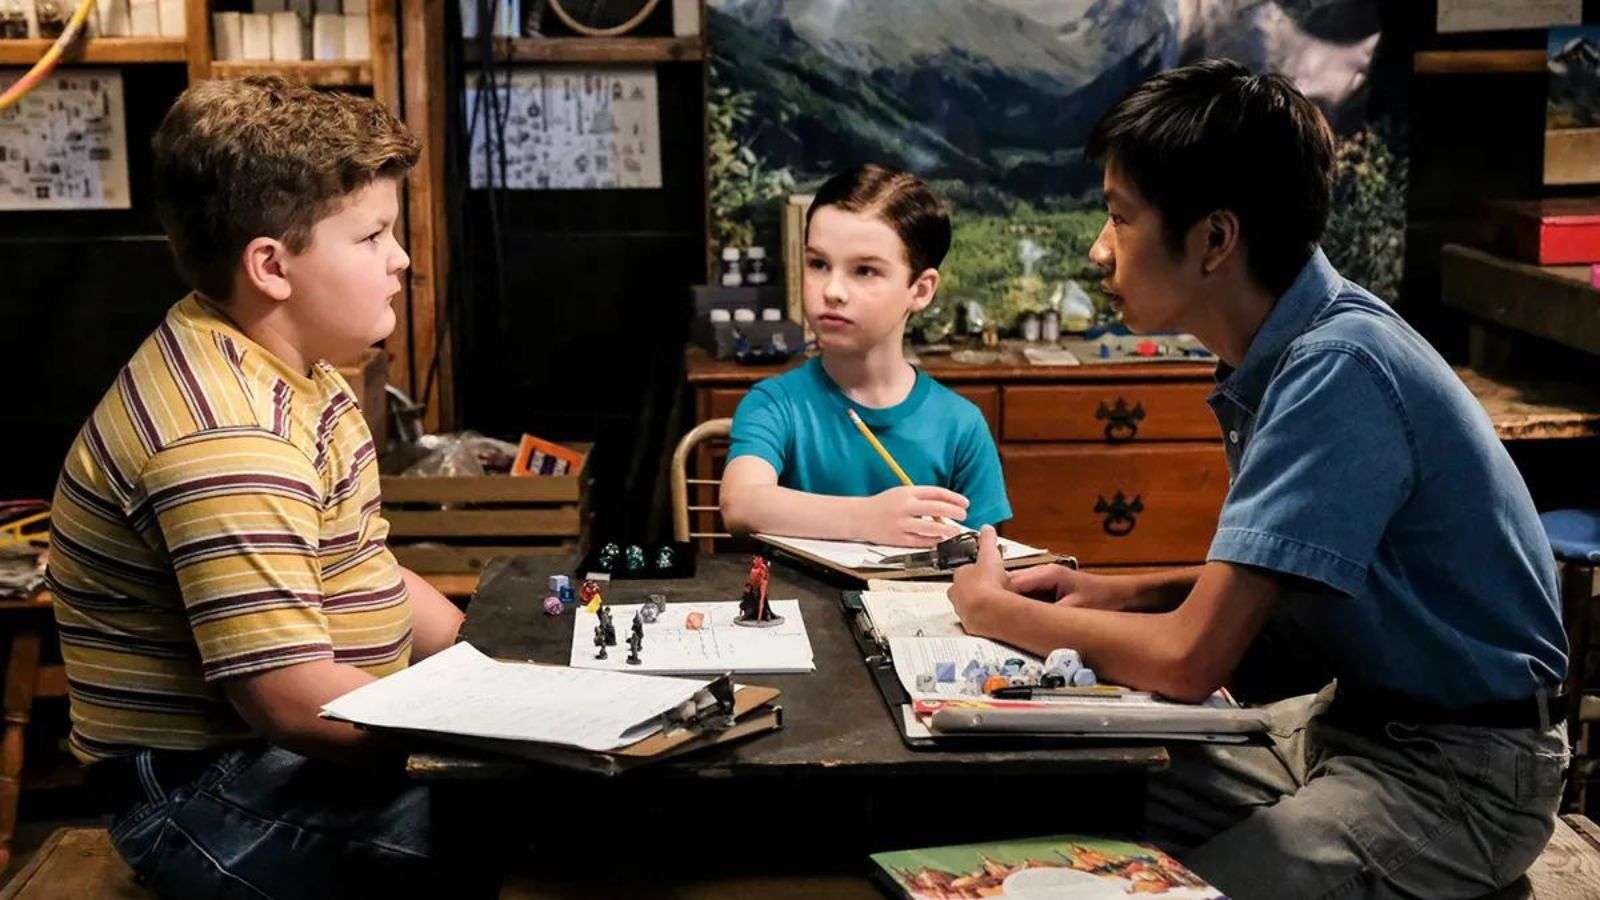 Sheldon, Billy, and Tam in Young Sheldon